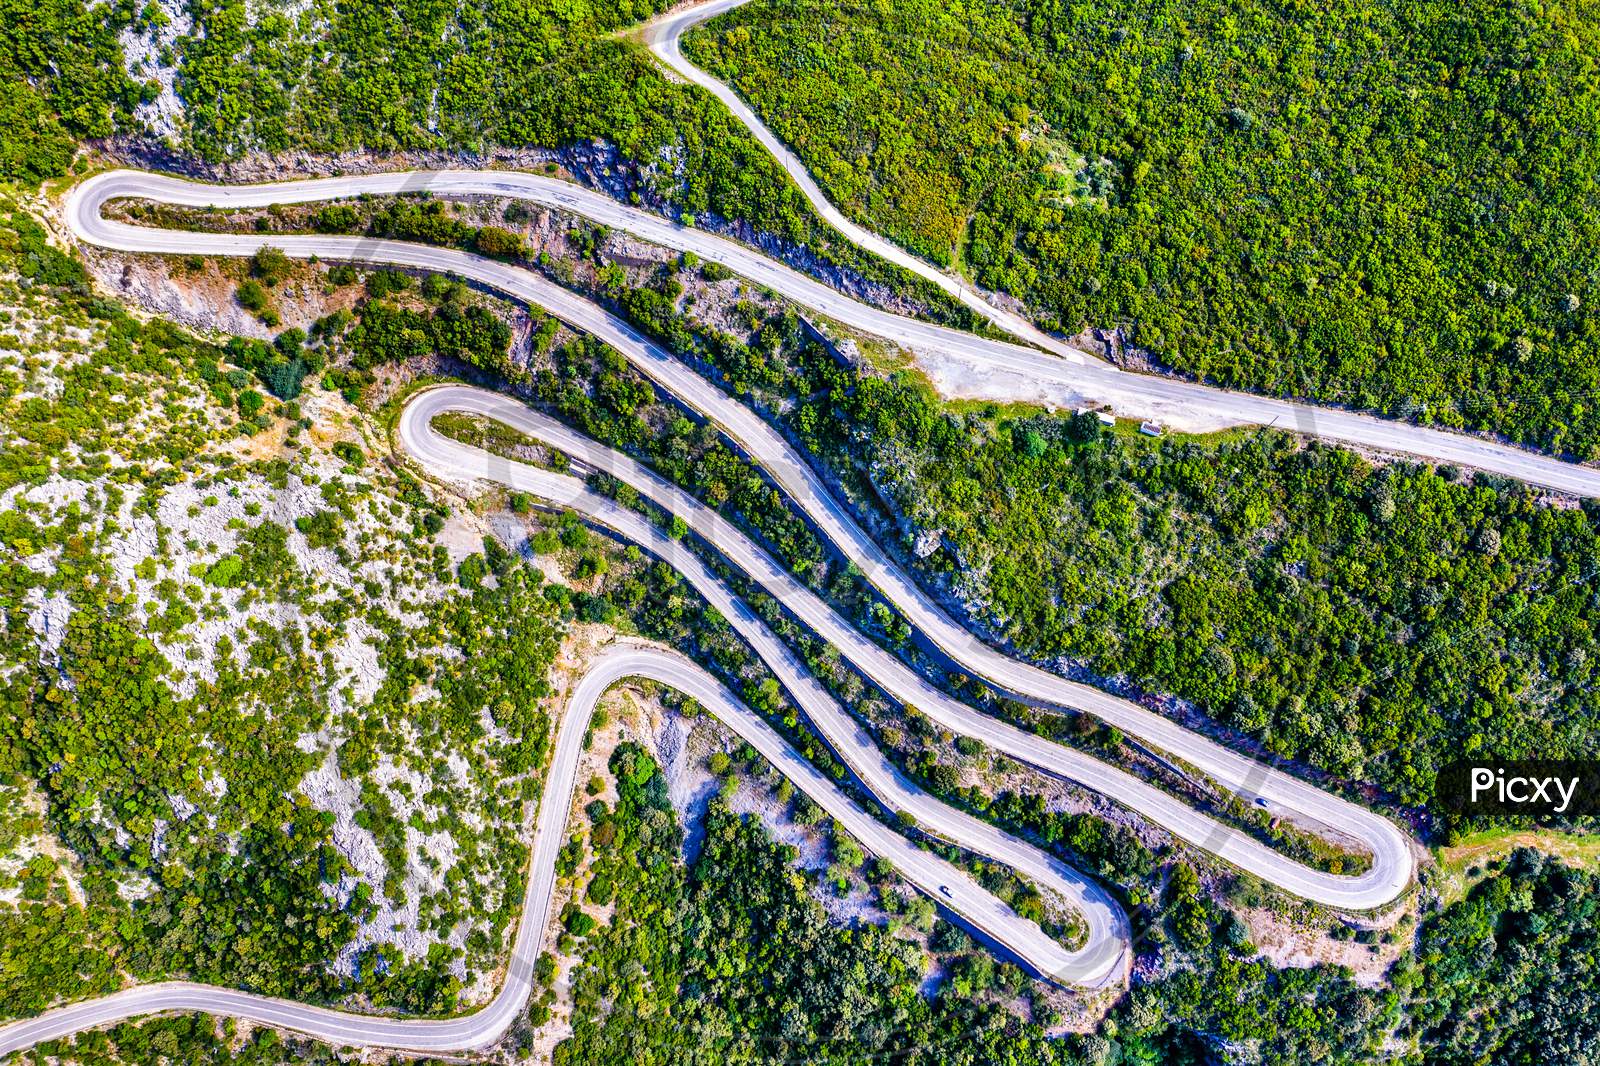 Winding Road In The Mountains Of Greece